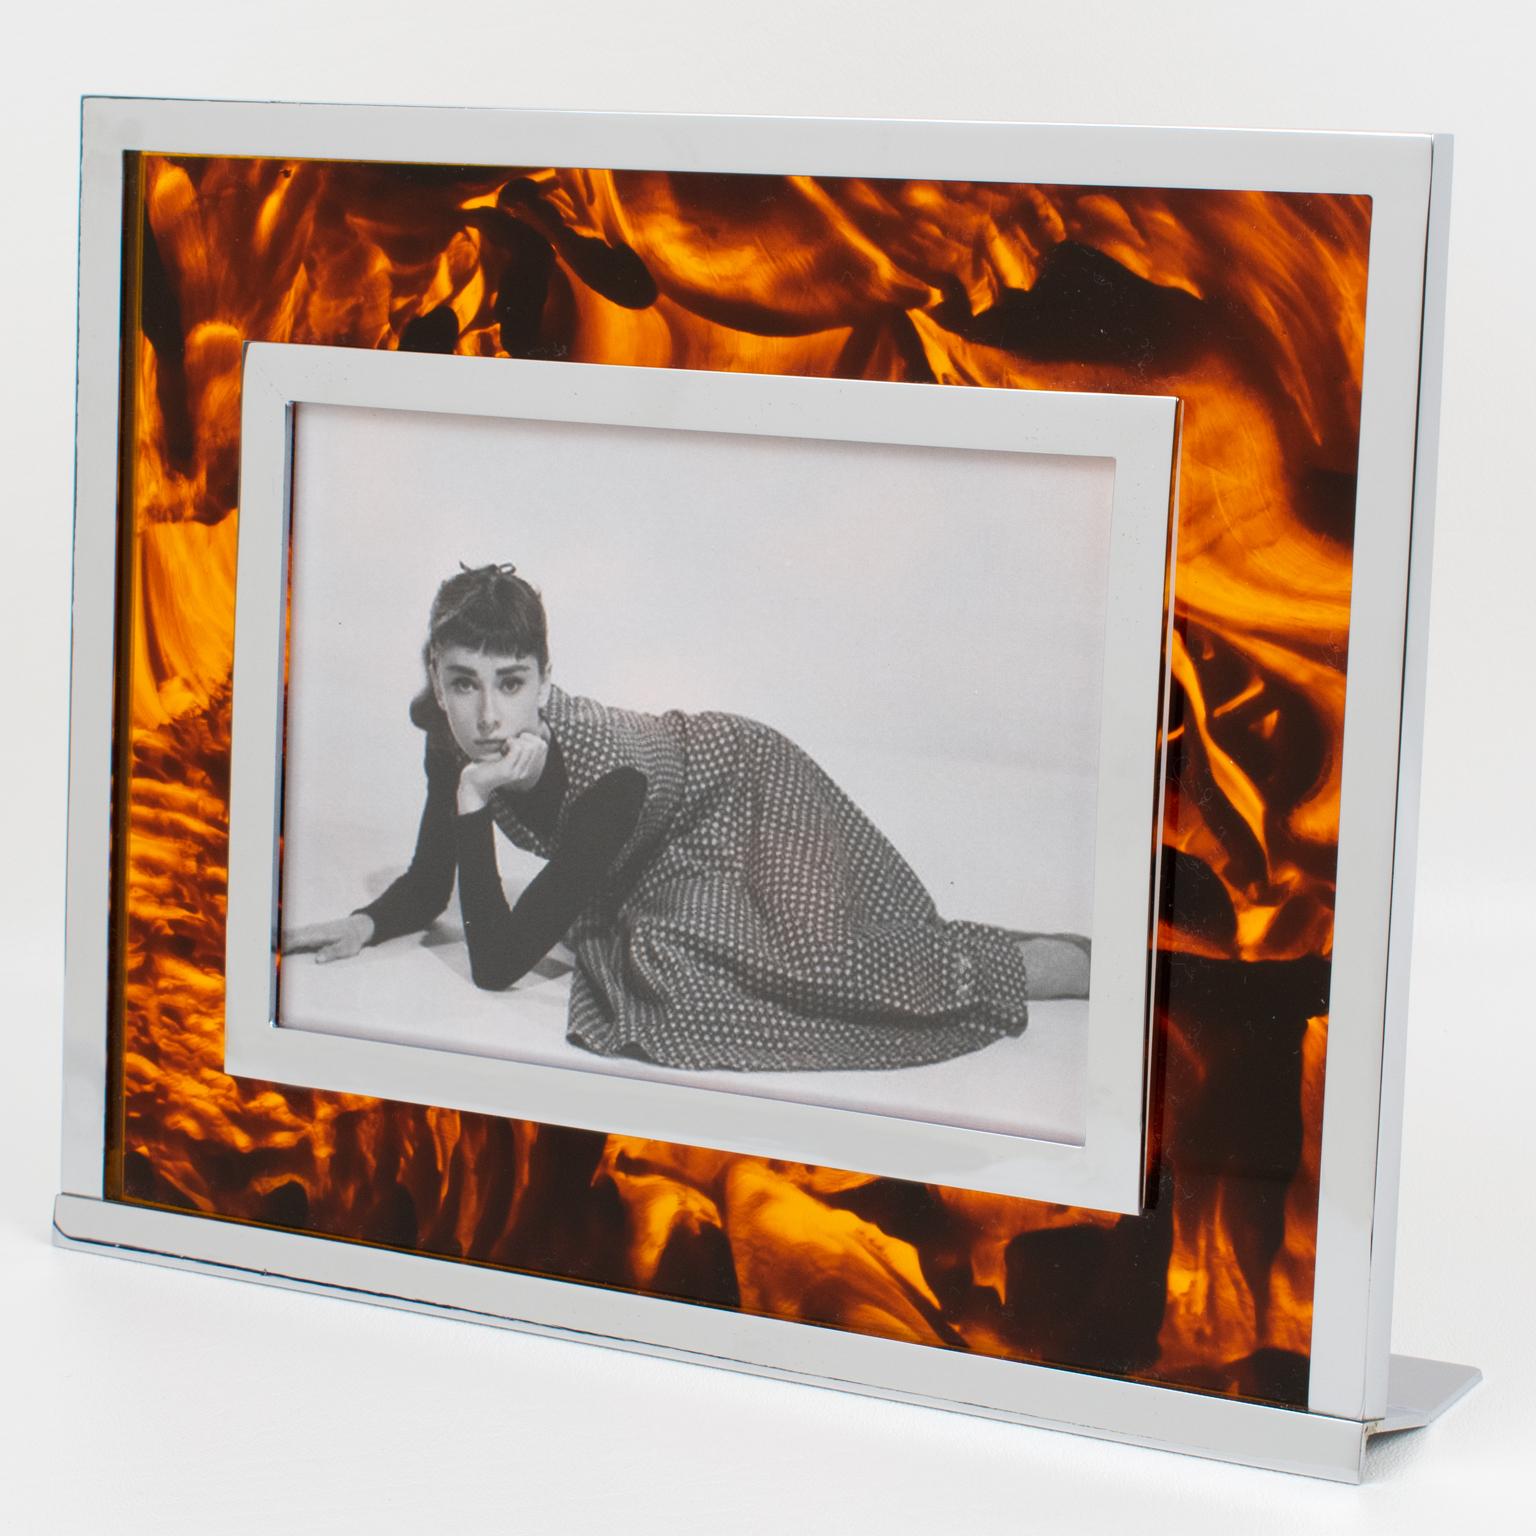 This impressive Italian Mid-Century picture photo frame is perfect for any modern or vintage home. The stunning easel-type table photo holder features a tortoise (tortoiseshell) textured pattern Lucite and chromed metal framing, giving it a classic